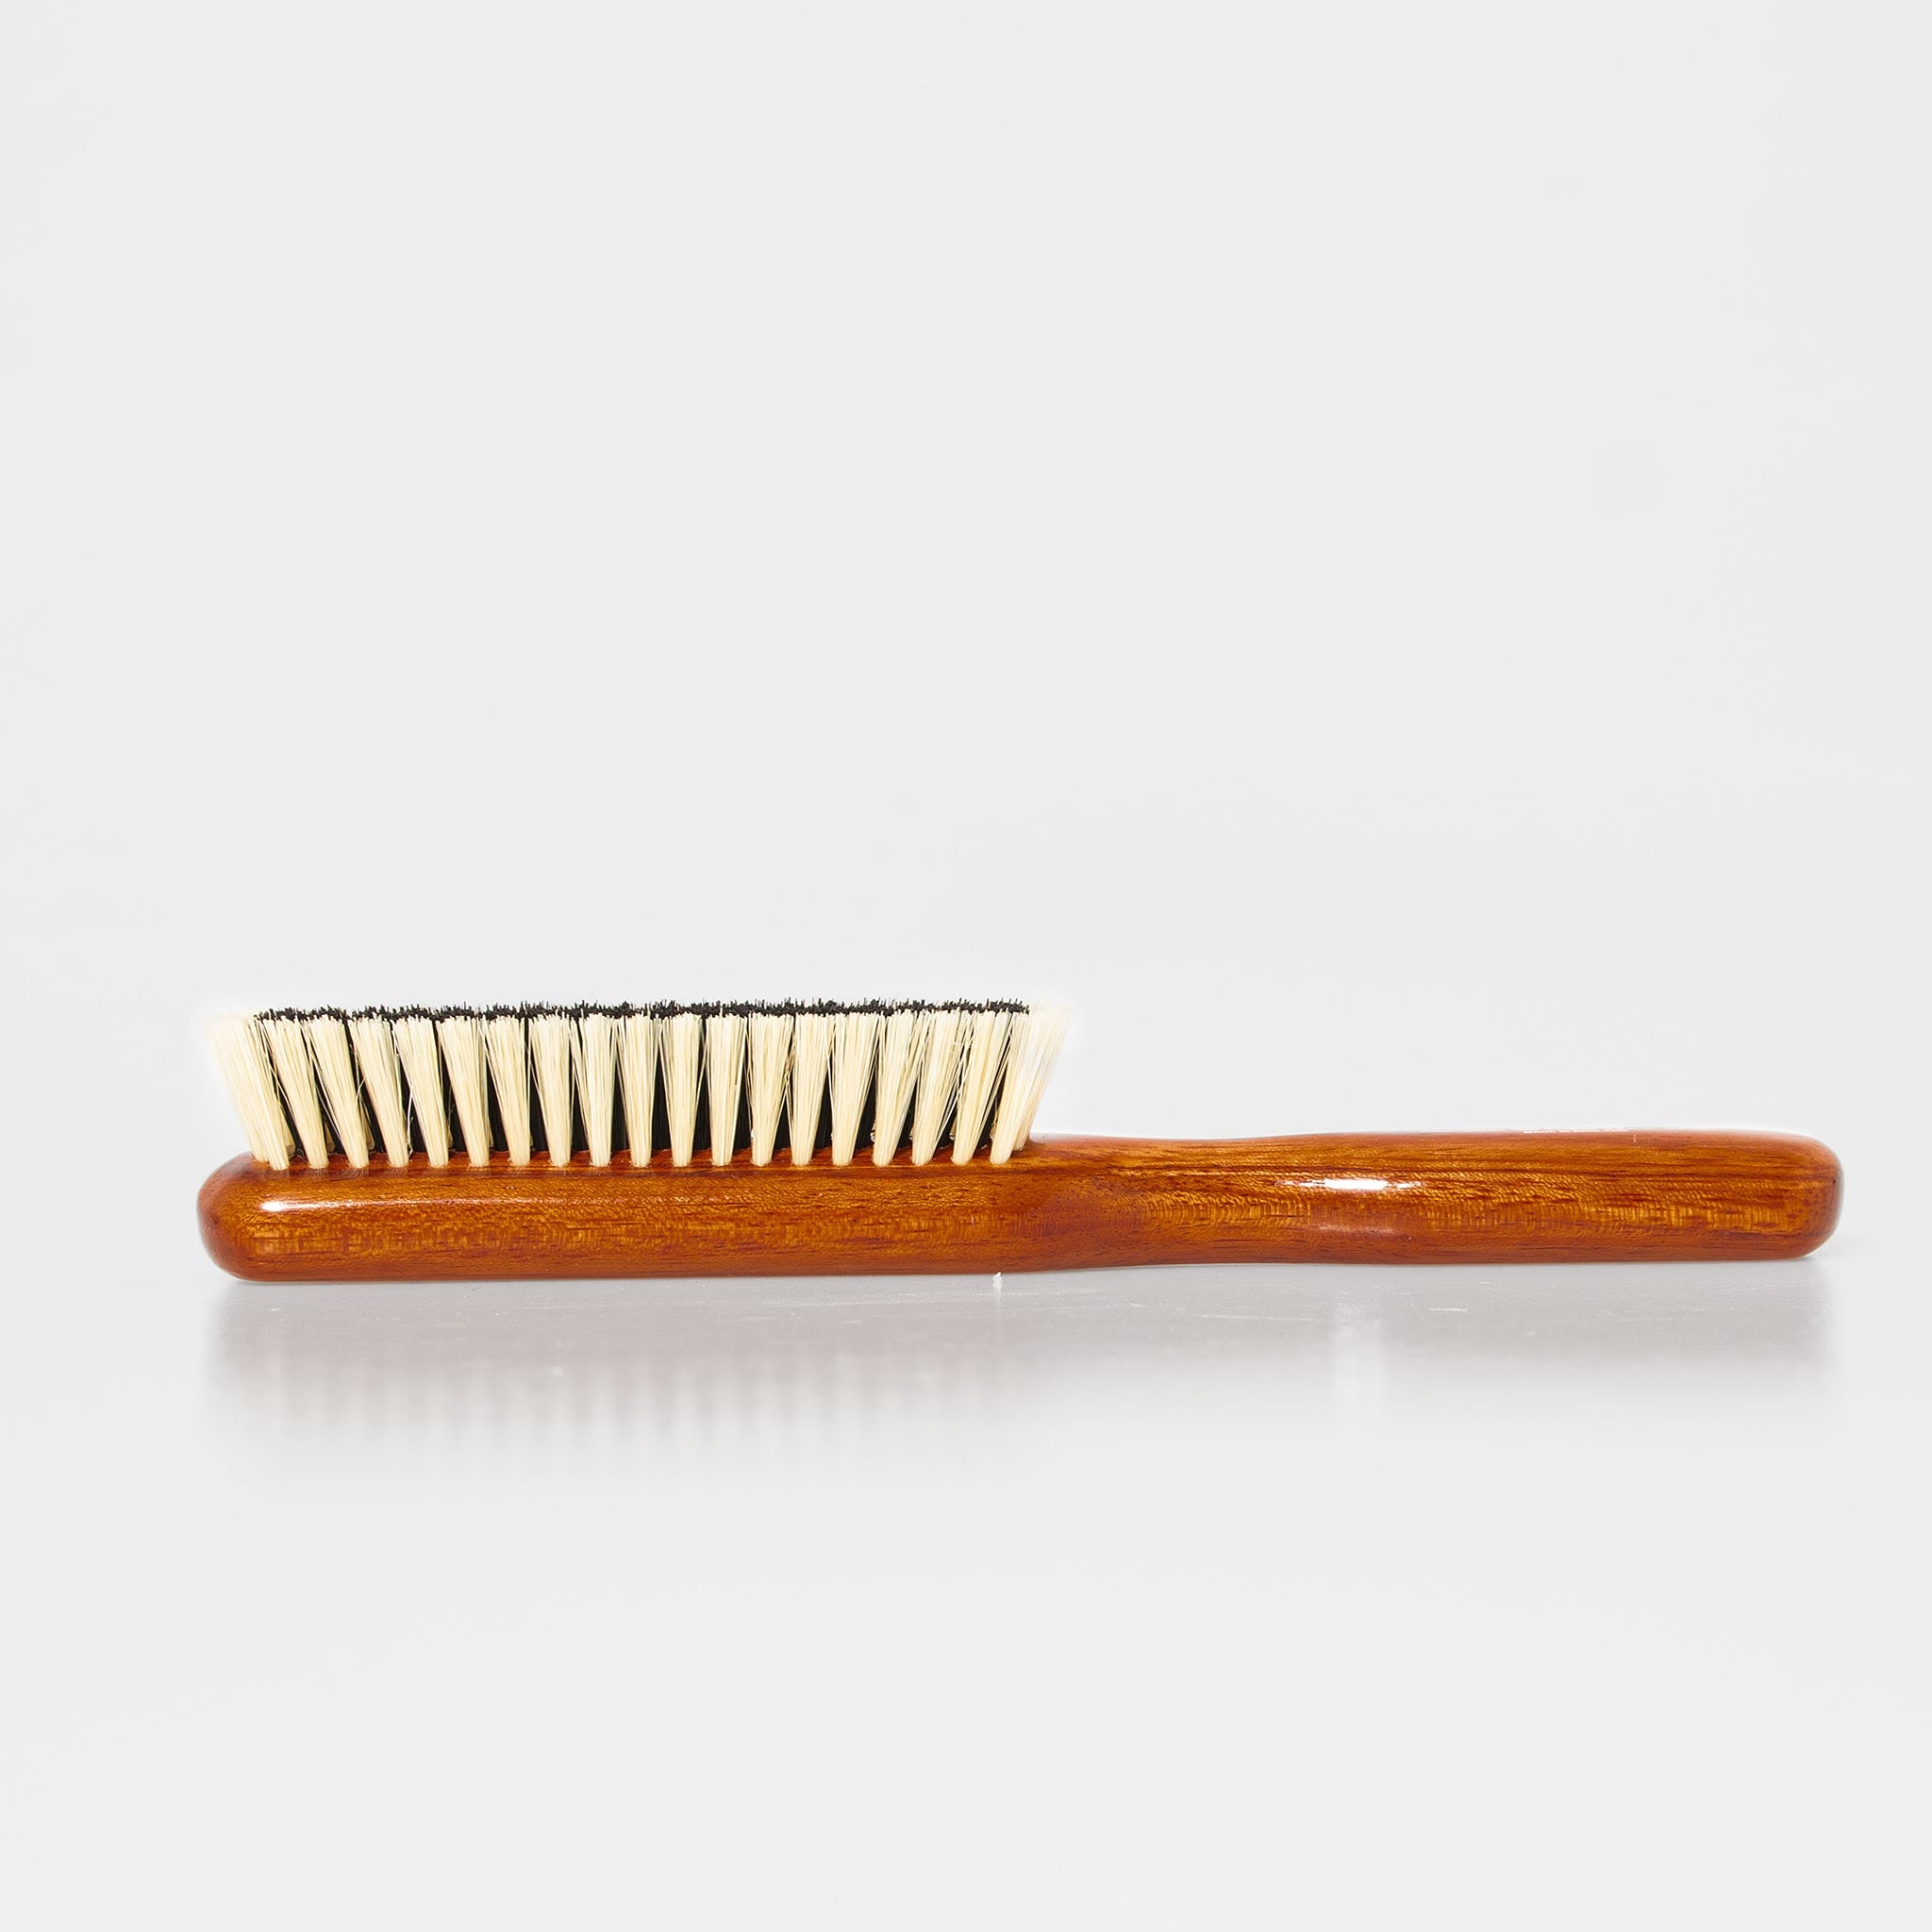 KENT -  CLOTHES BRUSH FOR CASHMERE CARECP65011637120028